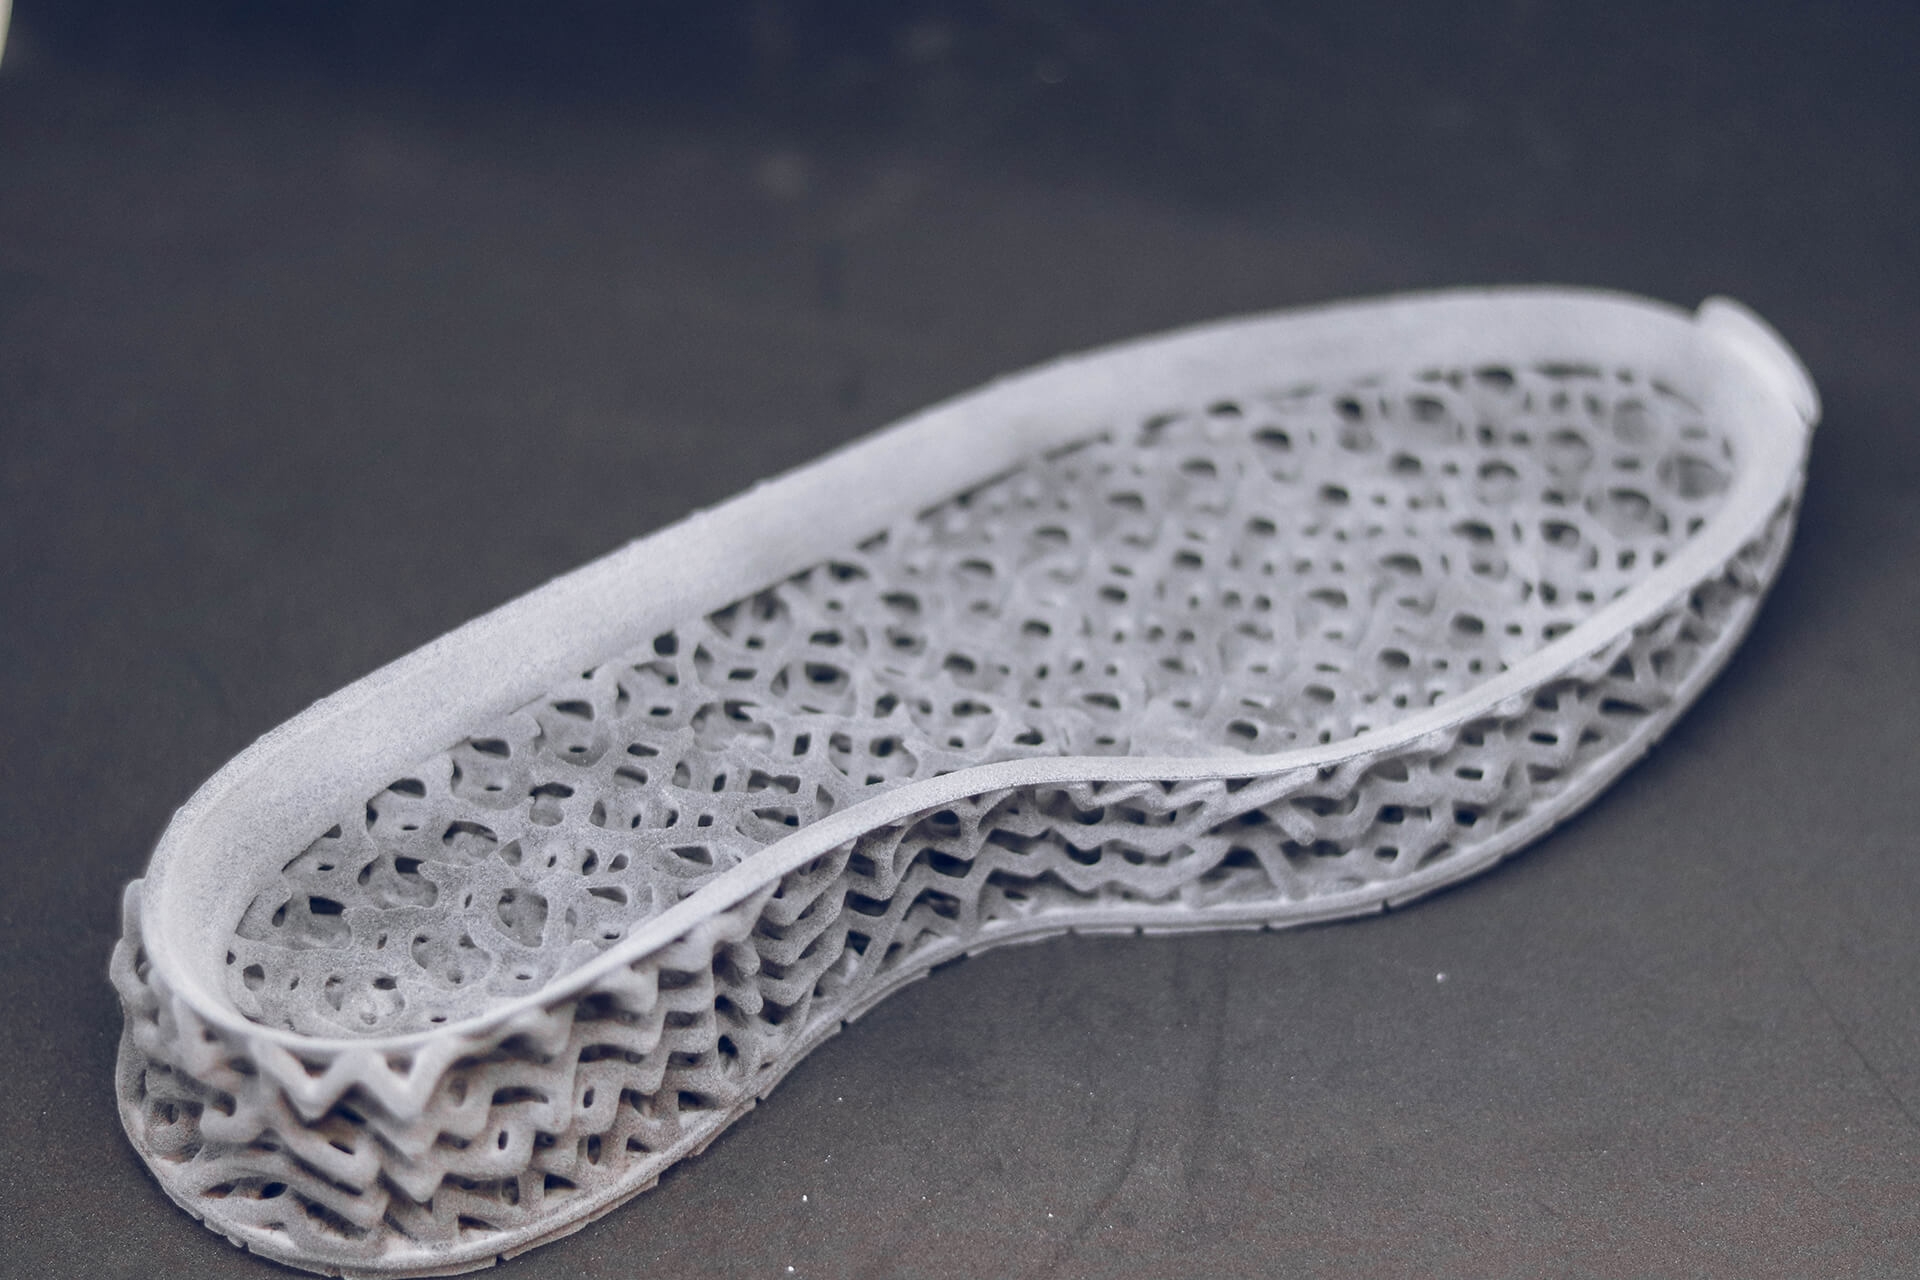 Polymer 3D printing for shoe components